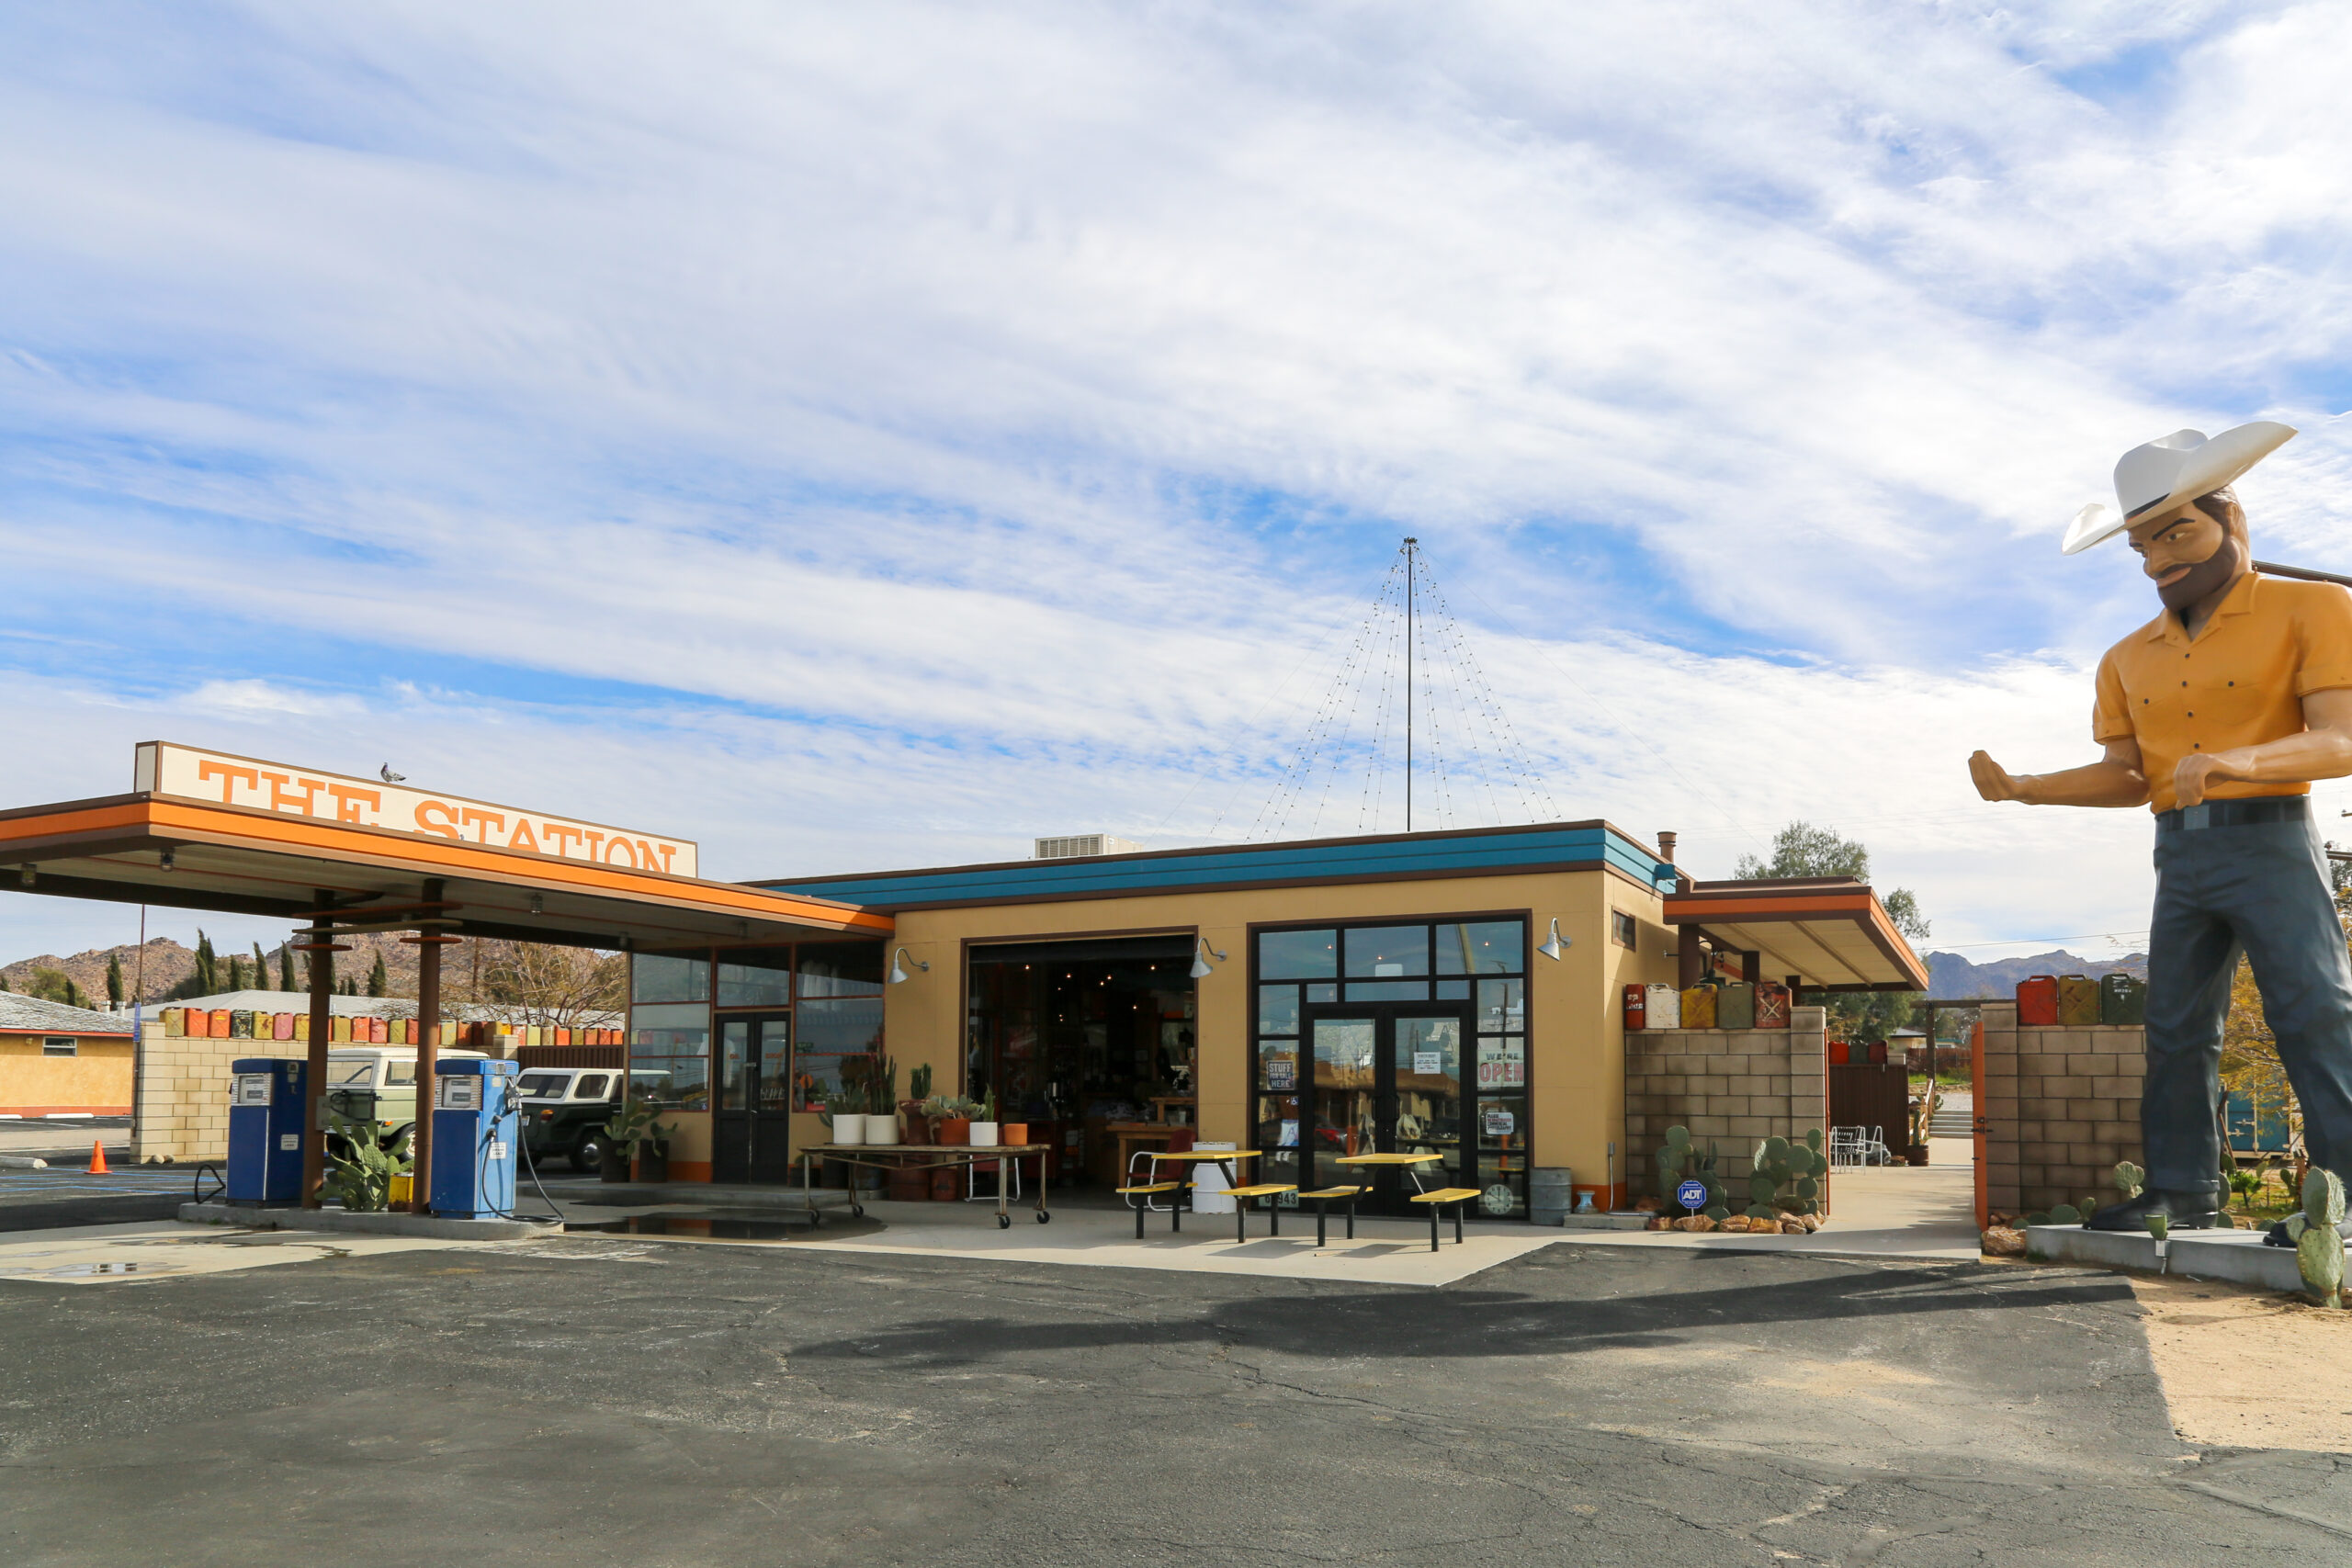 Exterior view of a former gas station renovated into a quirky gift shop called The Station in Joshua Tree, California.